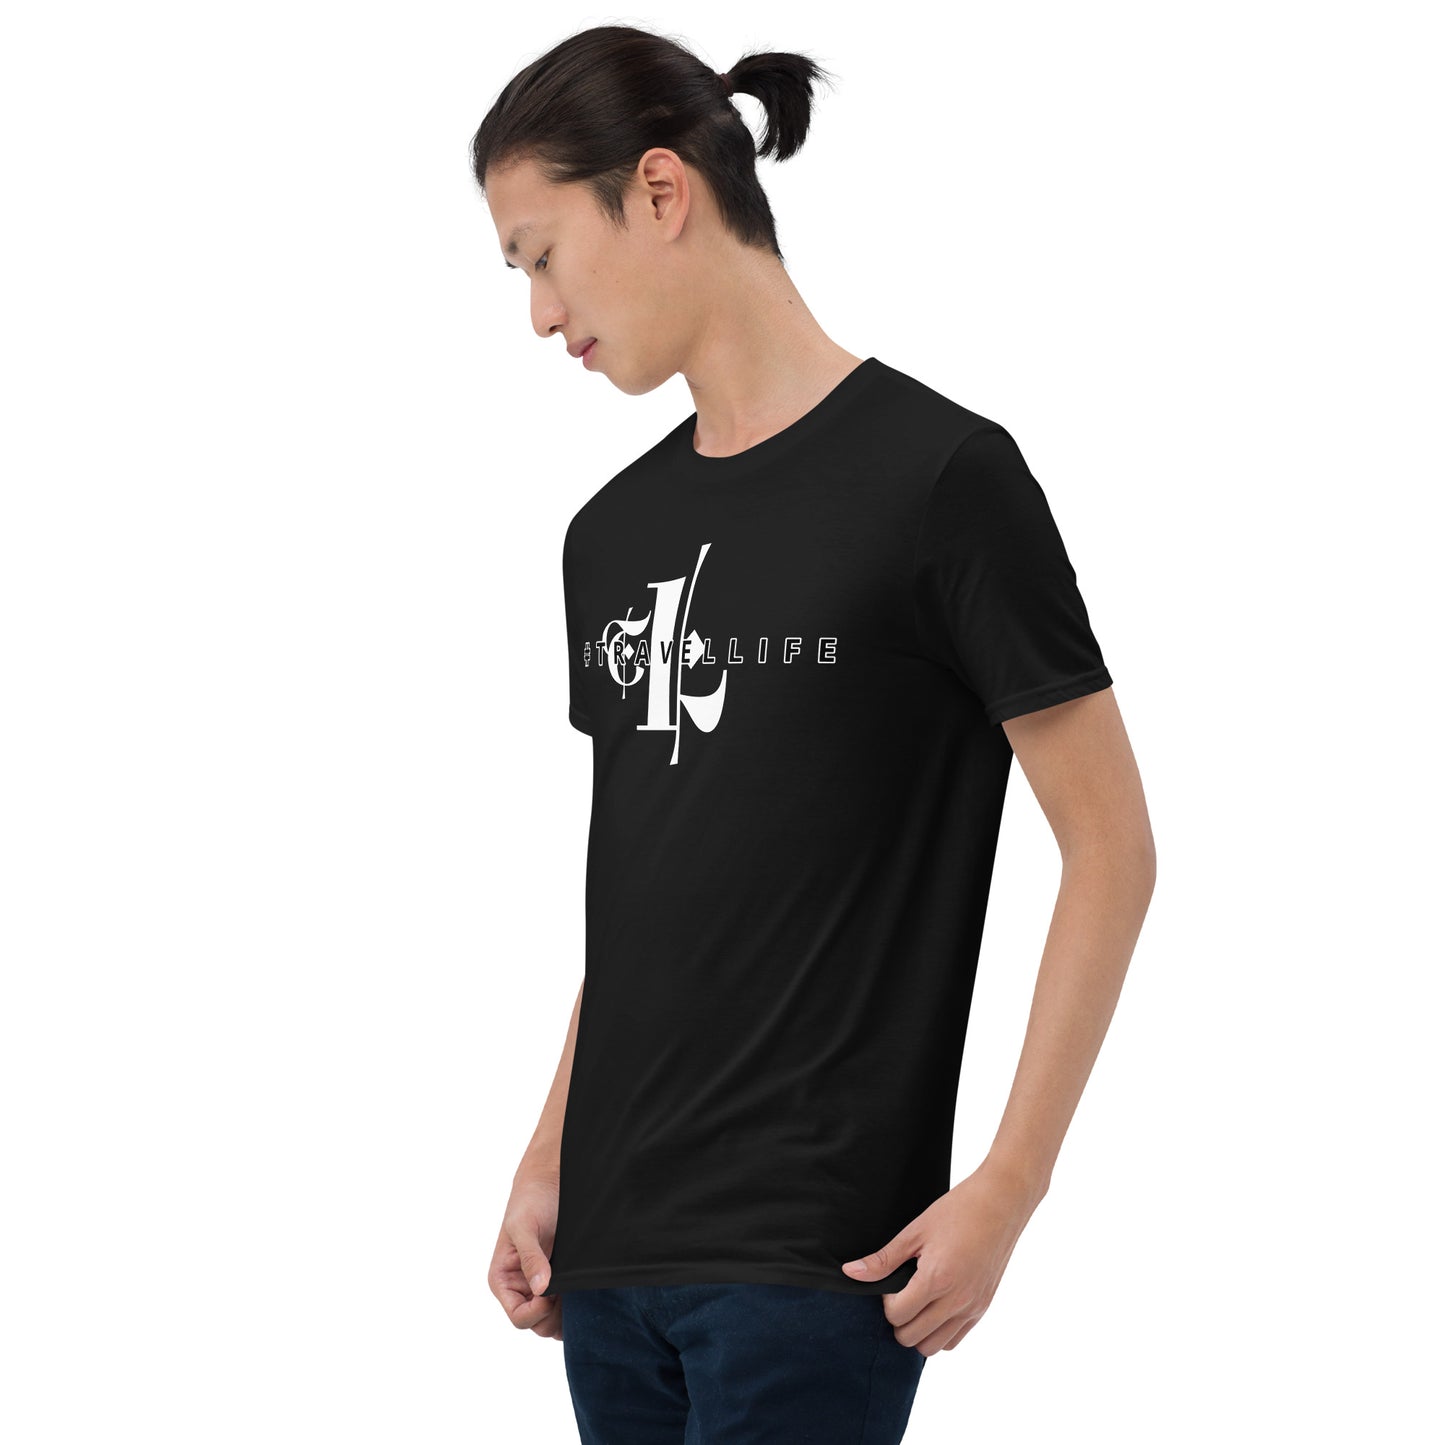 #Travellife in #TL Unisex T-Shirt